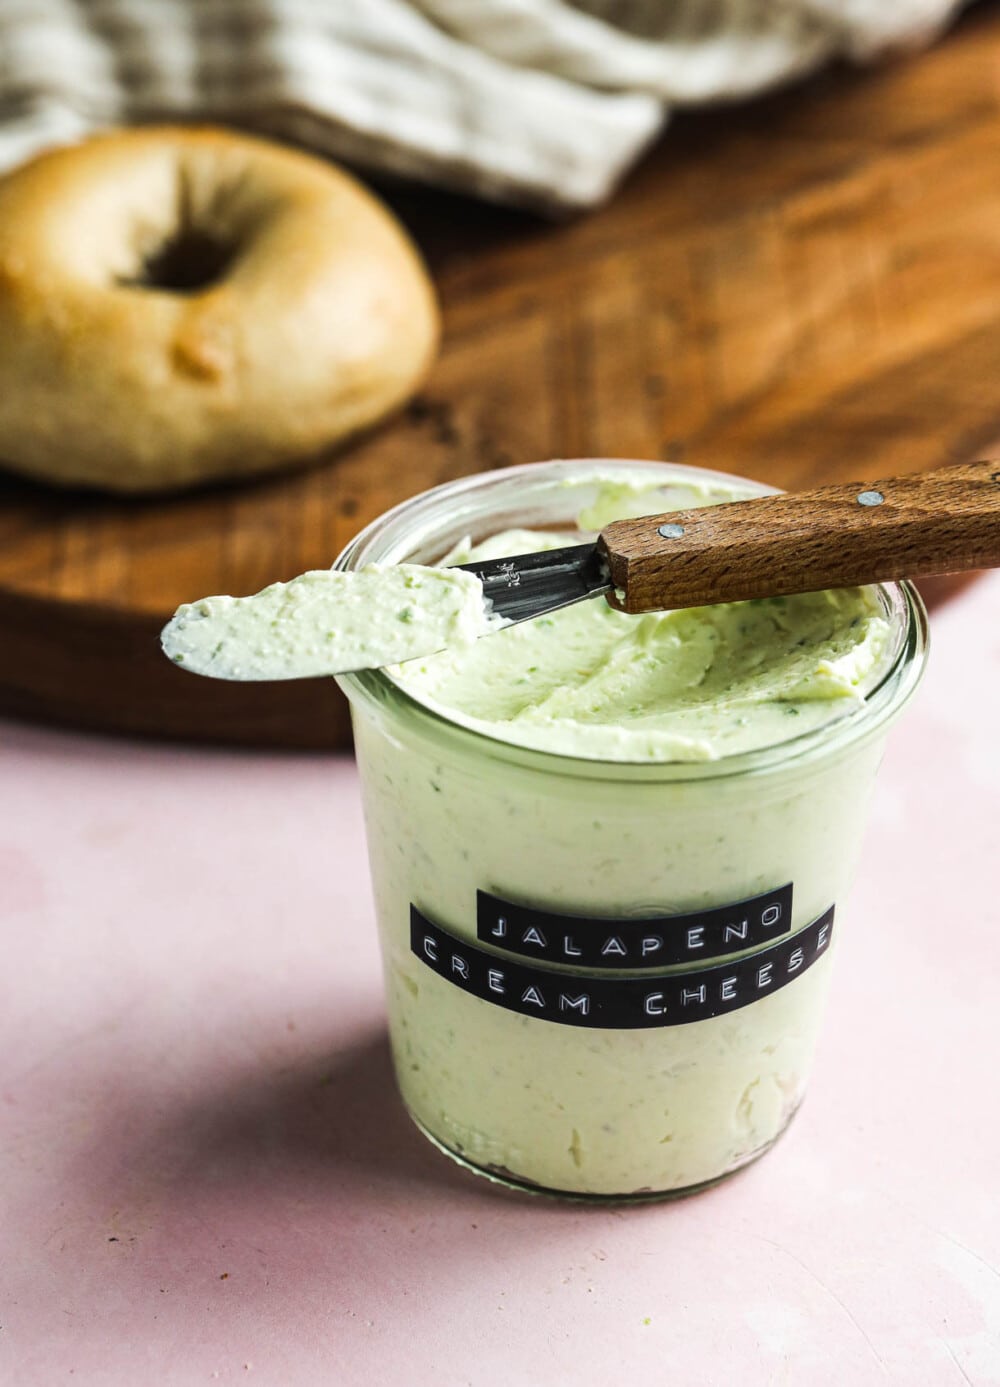 jalapeno cream cheese in a glass jar with knife laying across the top and bagel in the backround